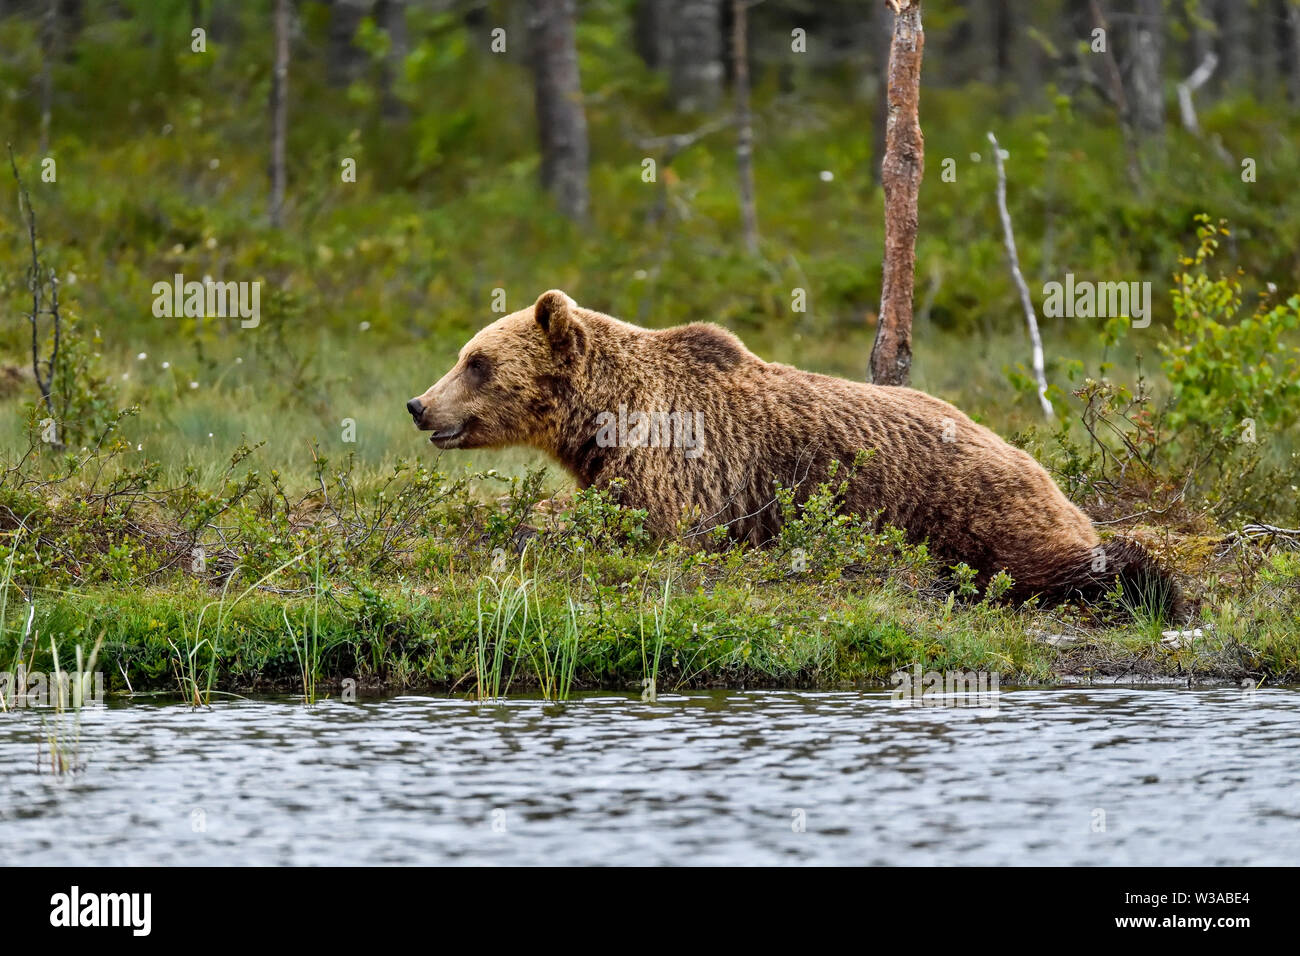 Brown bear is relaxing on the ground at the swamp lake in the forest. Stock Photo